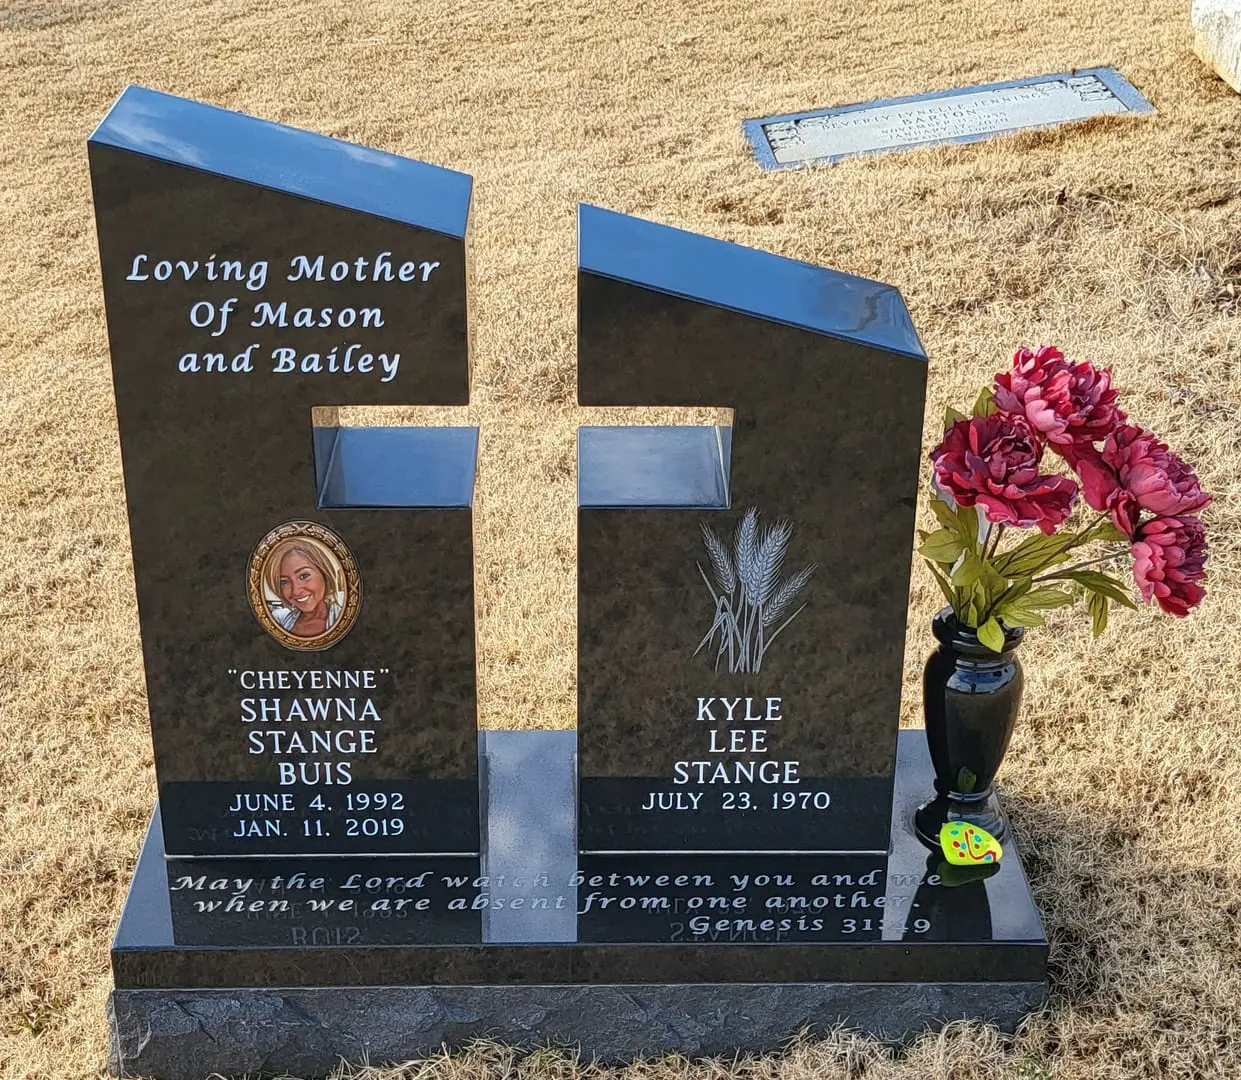 A memorial slab for Shawna Stange Buis and Kyle Lee Stange